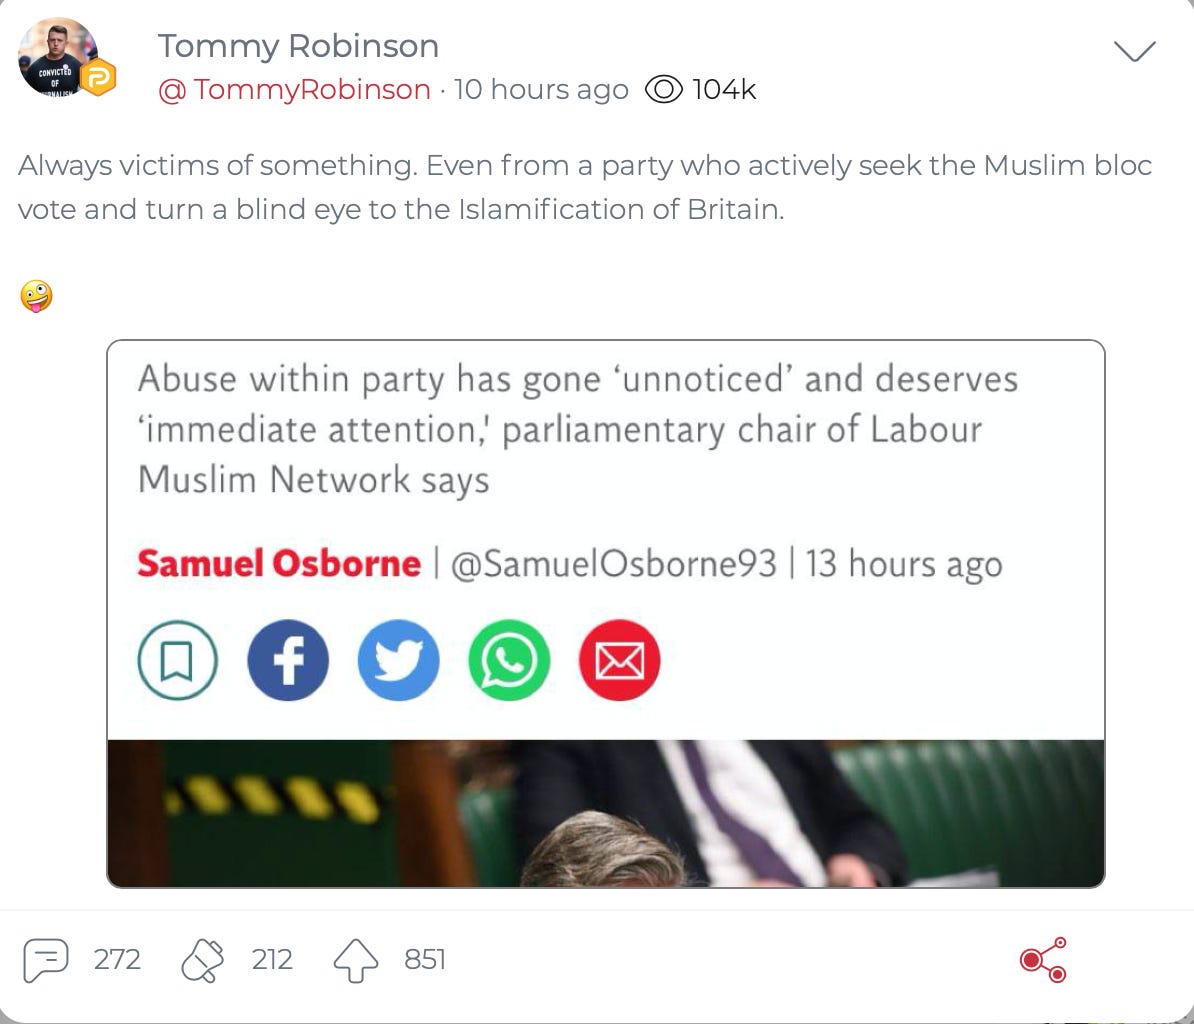 Tommy Robinson posting anti-Muslim content on Parler early on Saturday, November 14, 2020. (Image: Parler screenshot.)